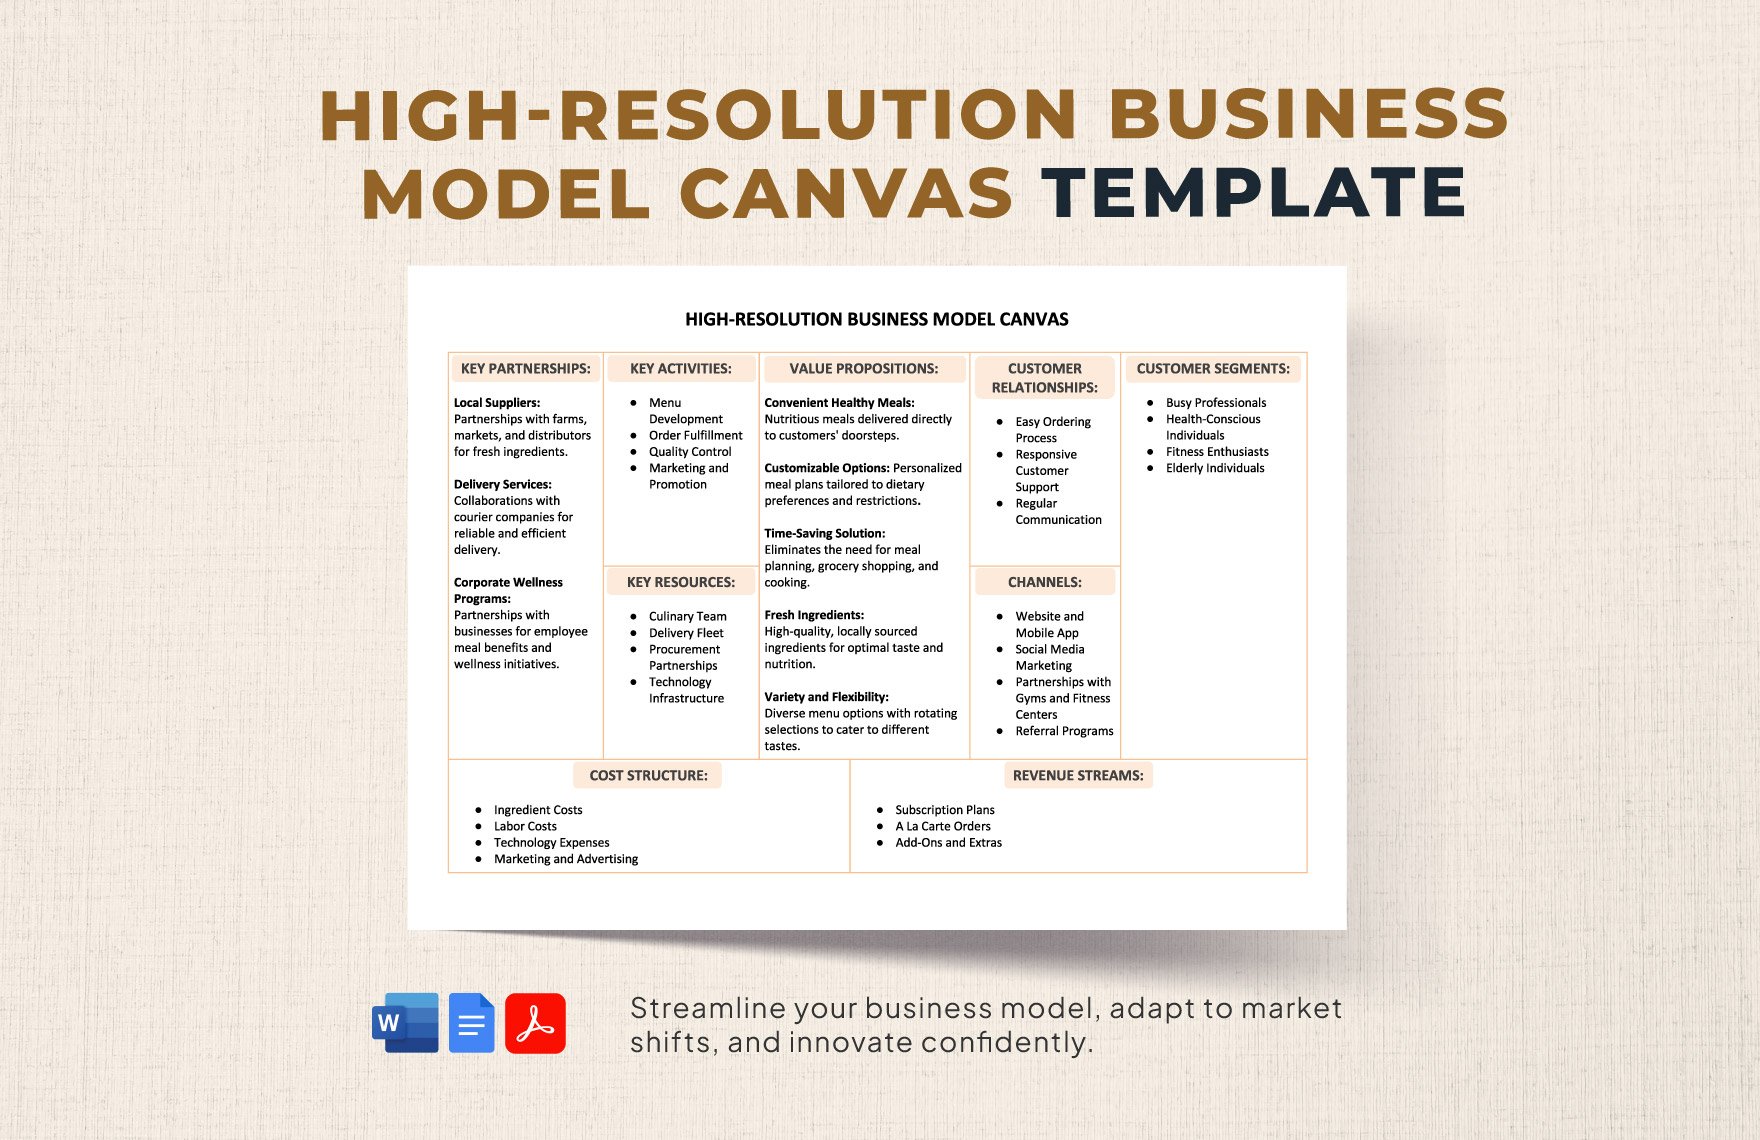 High-Resolution Business Model Canvas Template